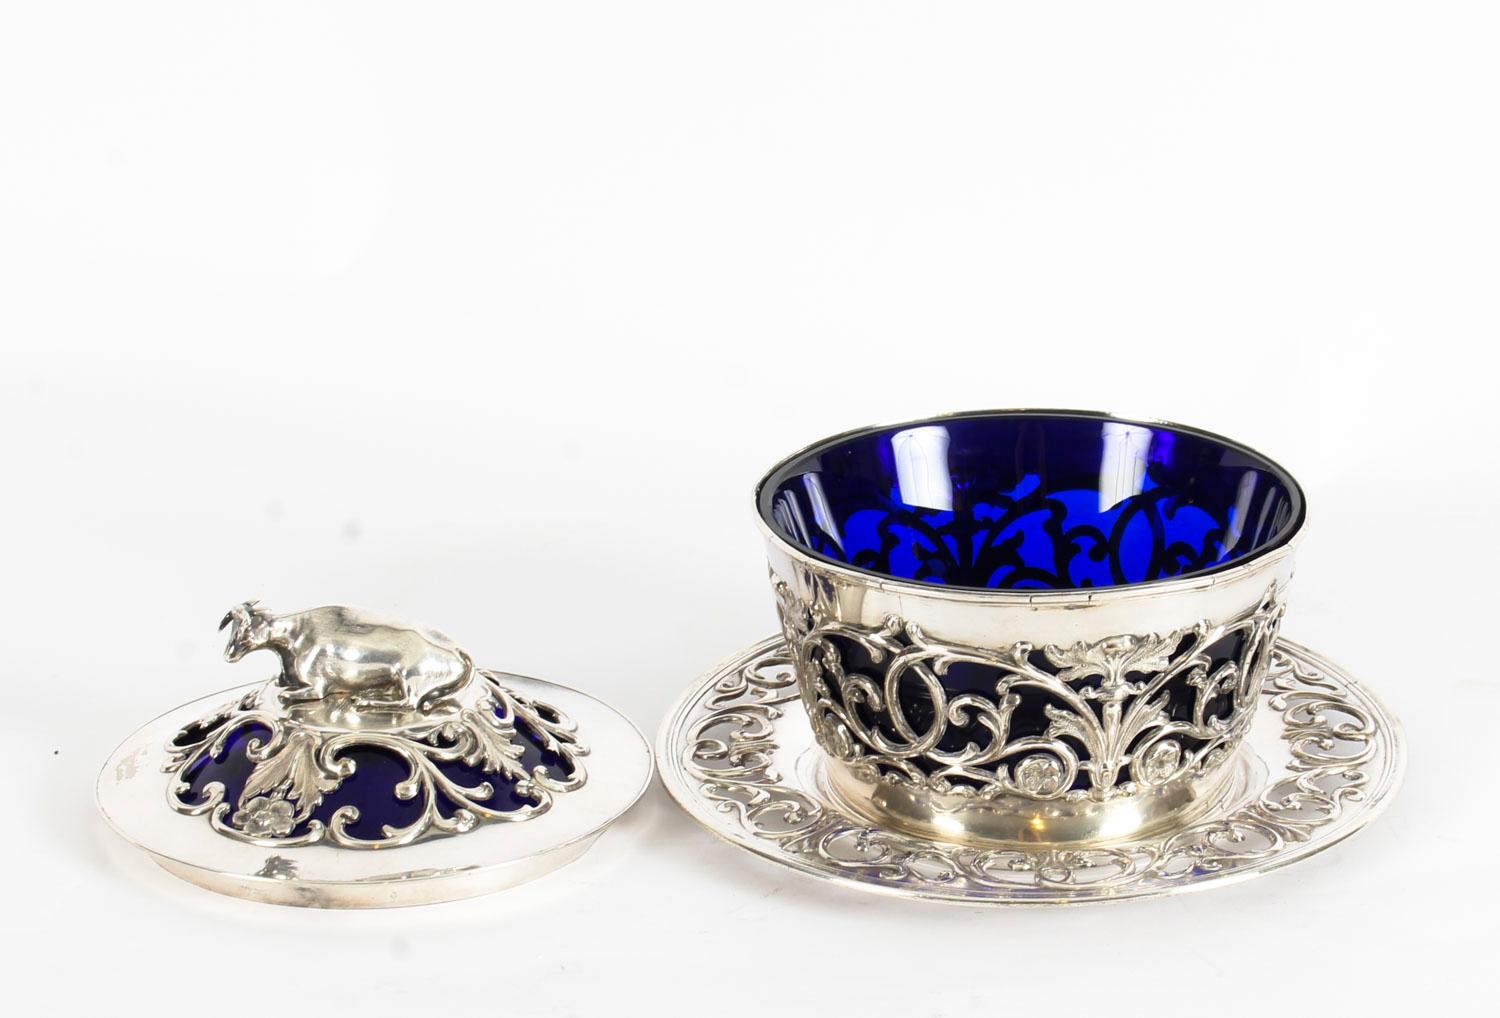 Sheffield Plate Old Sheffield Silver Plated and Bristol Blue Glass Butter Dish, 19th Century